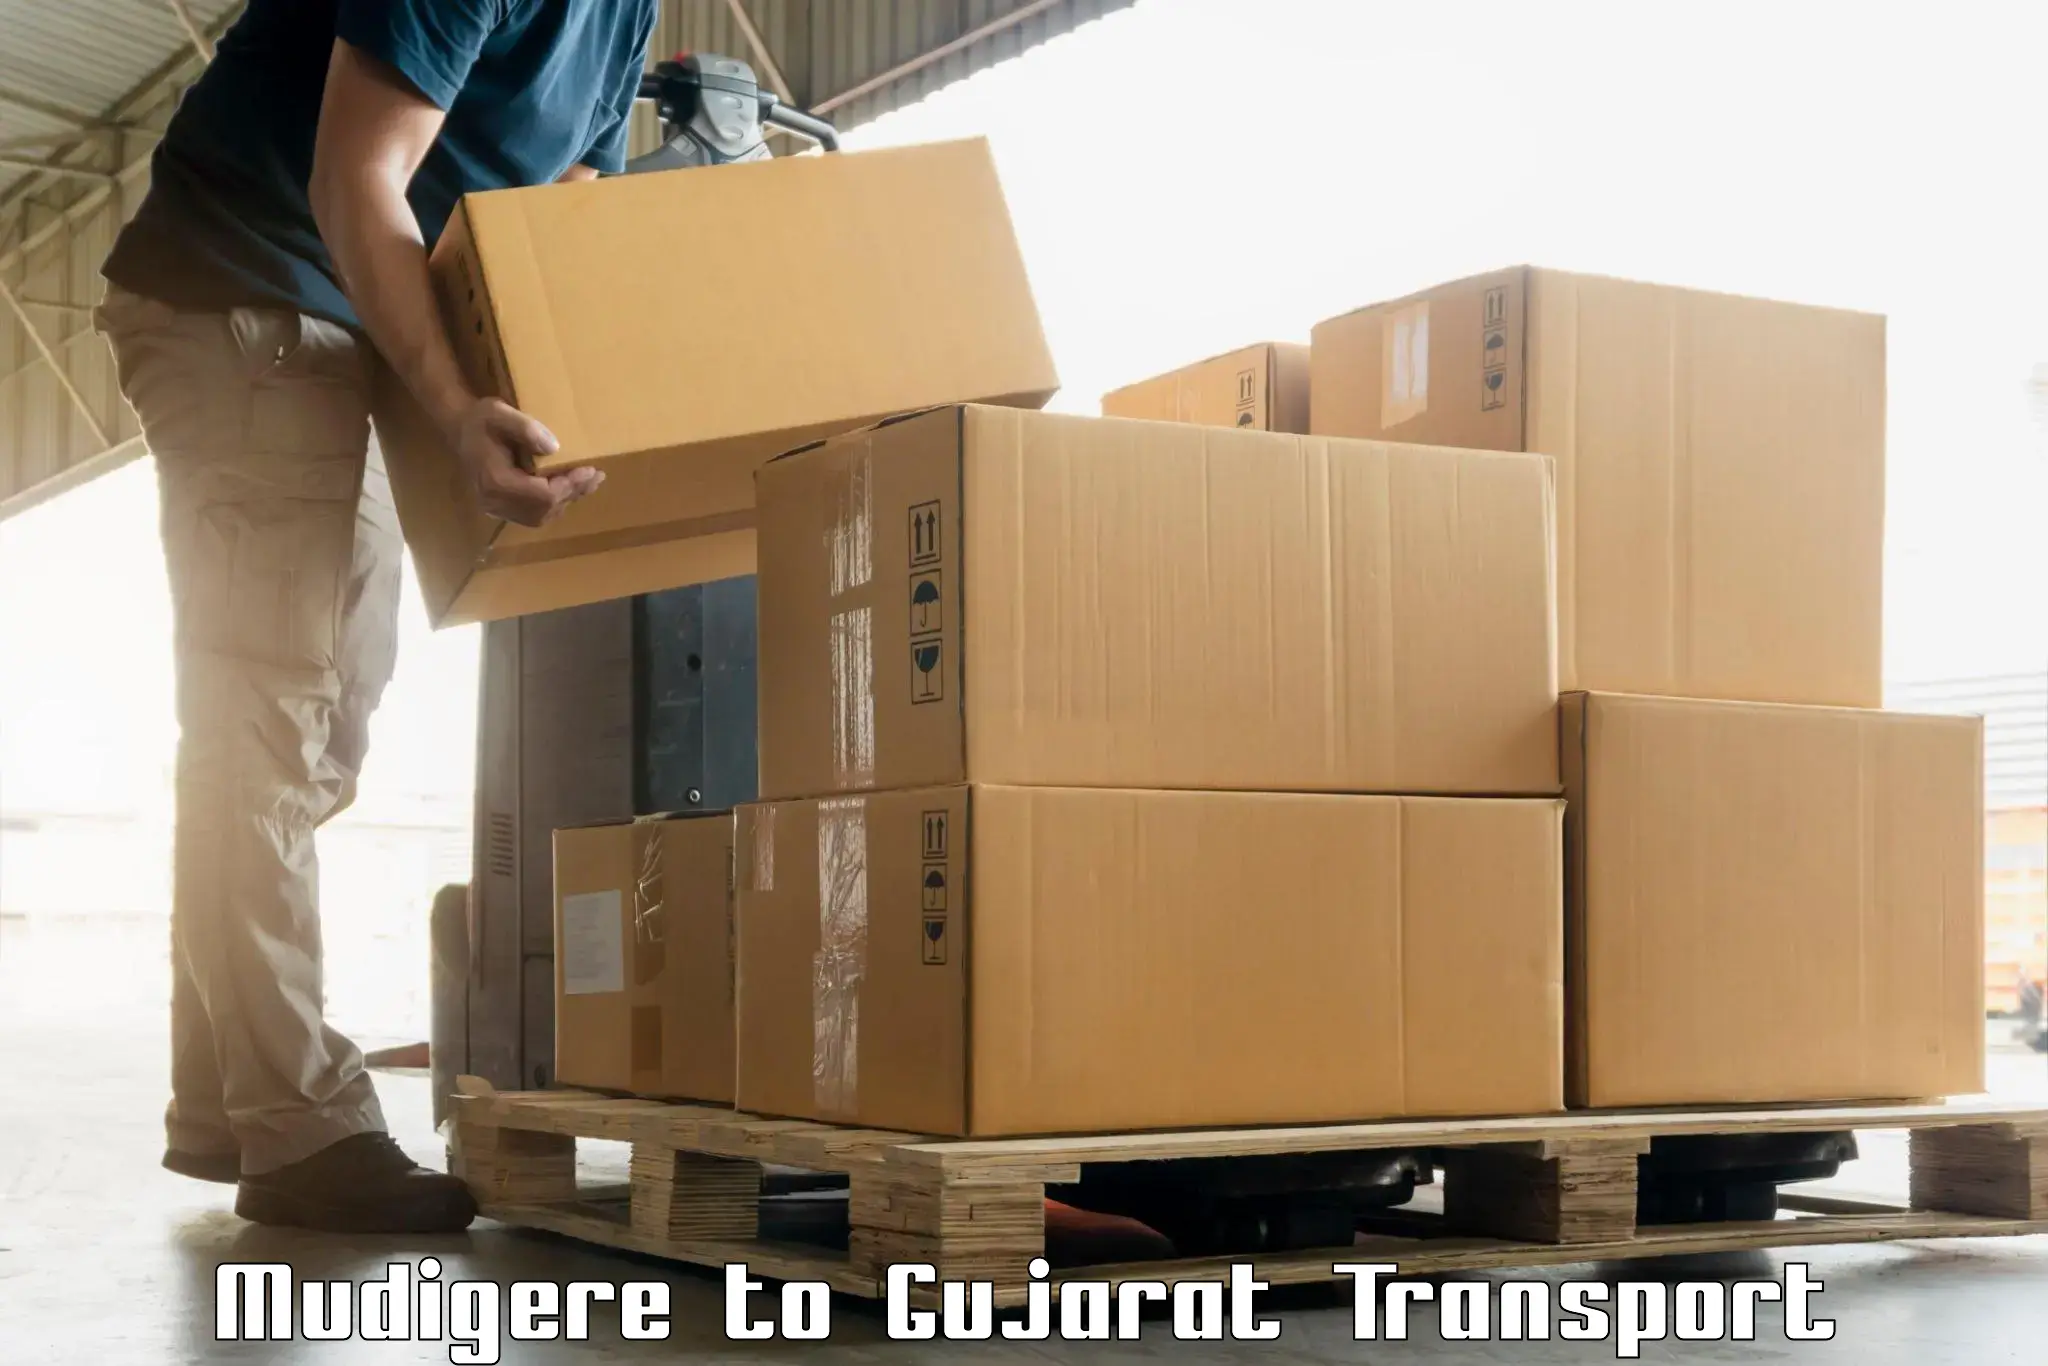 Container transport service Mudigere to Dholera